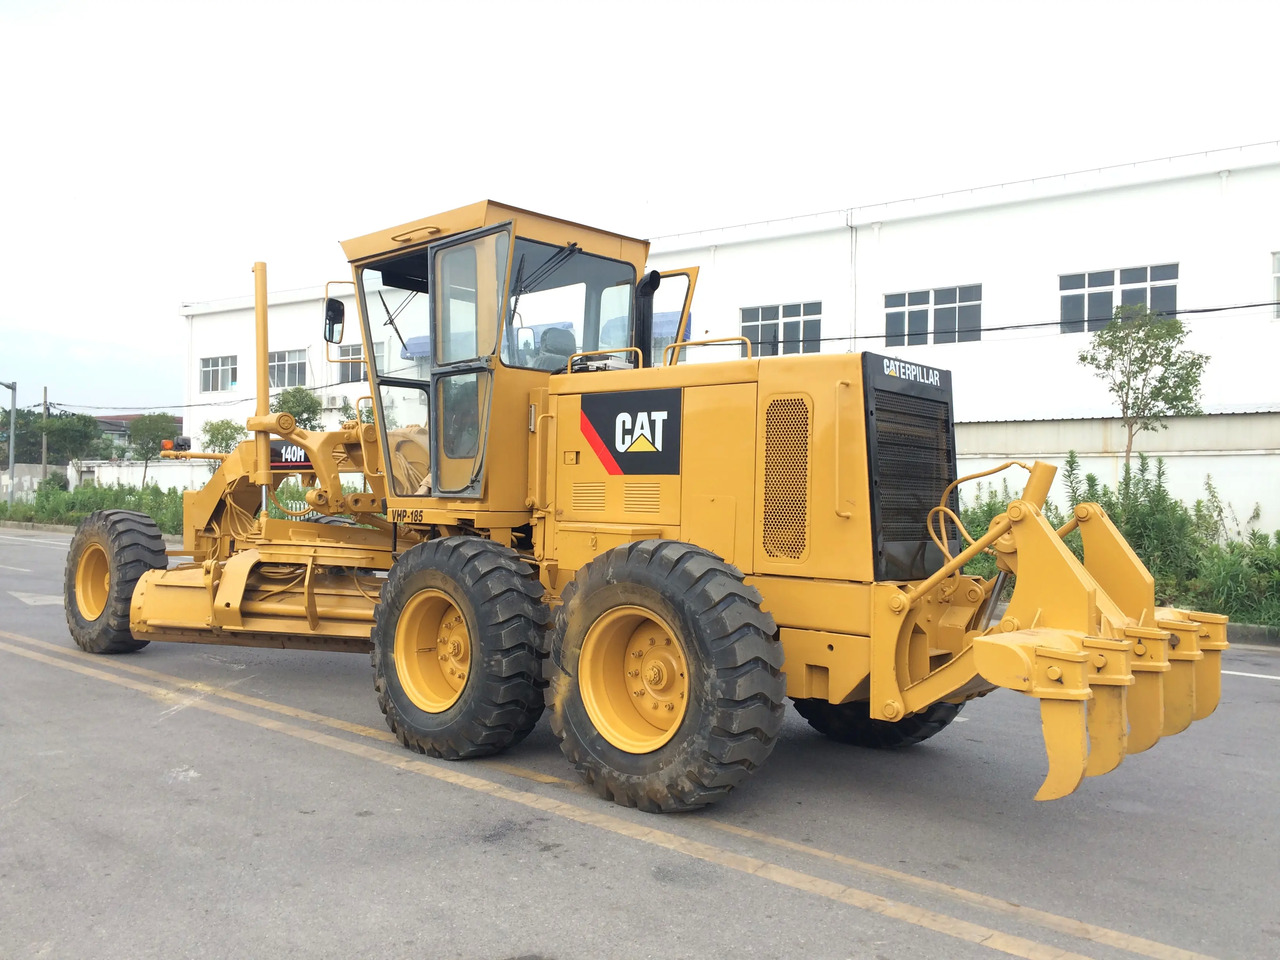 Грейдер Hot sale Used Cat 140H motor grader with good condition,USED heavy equipment used motor grader CAT 140H grader in China: фото 4